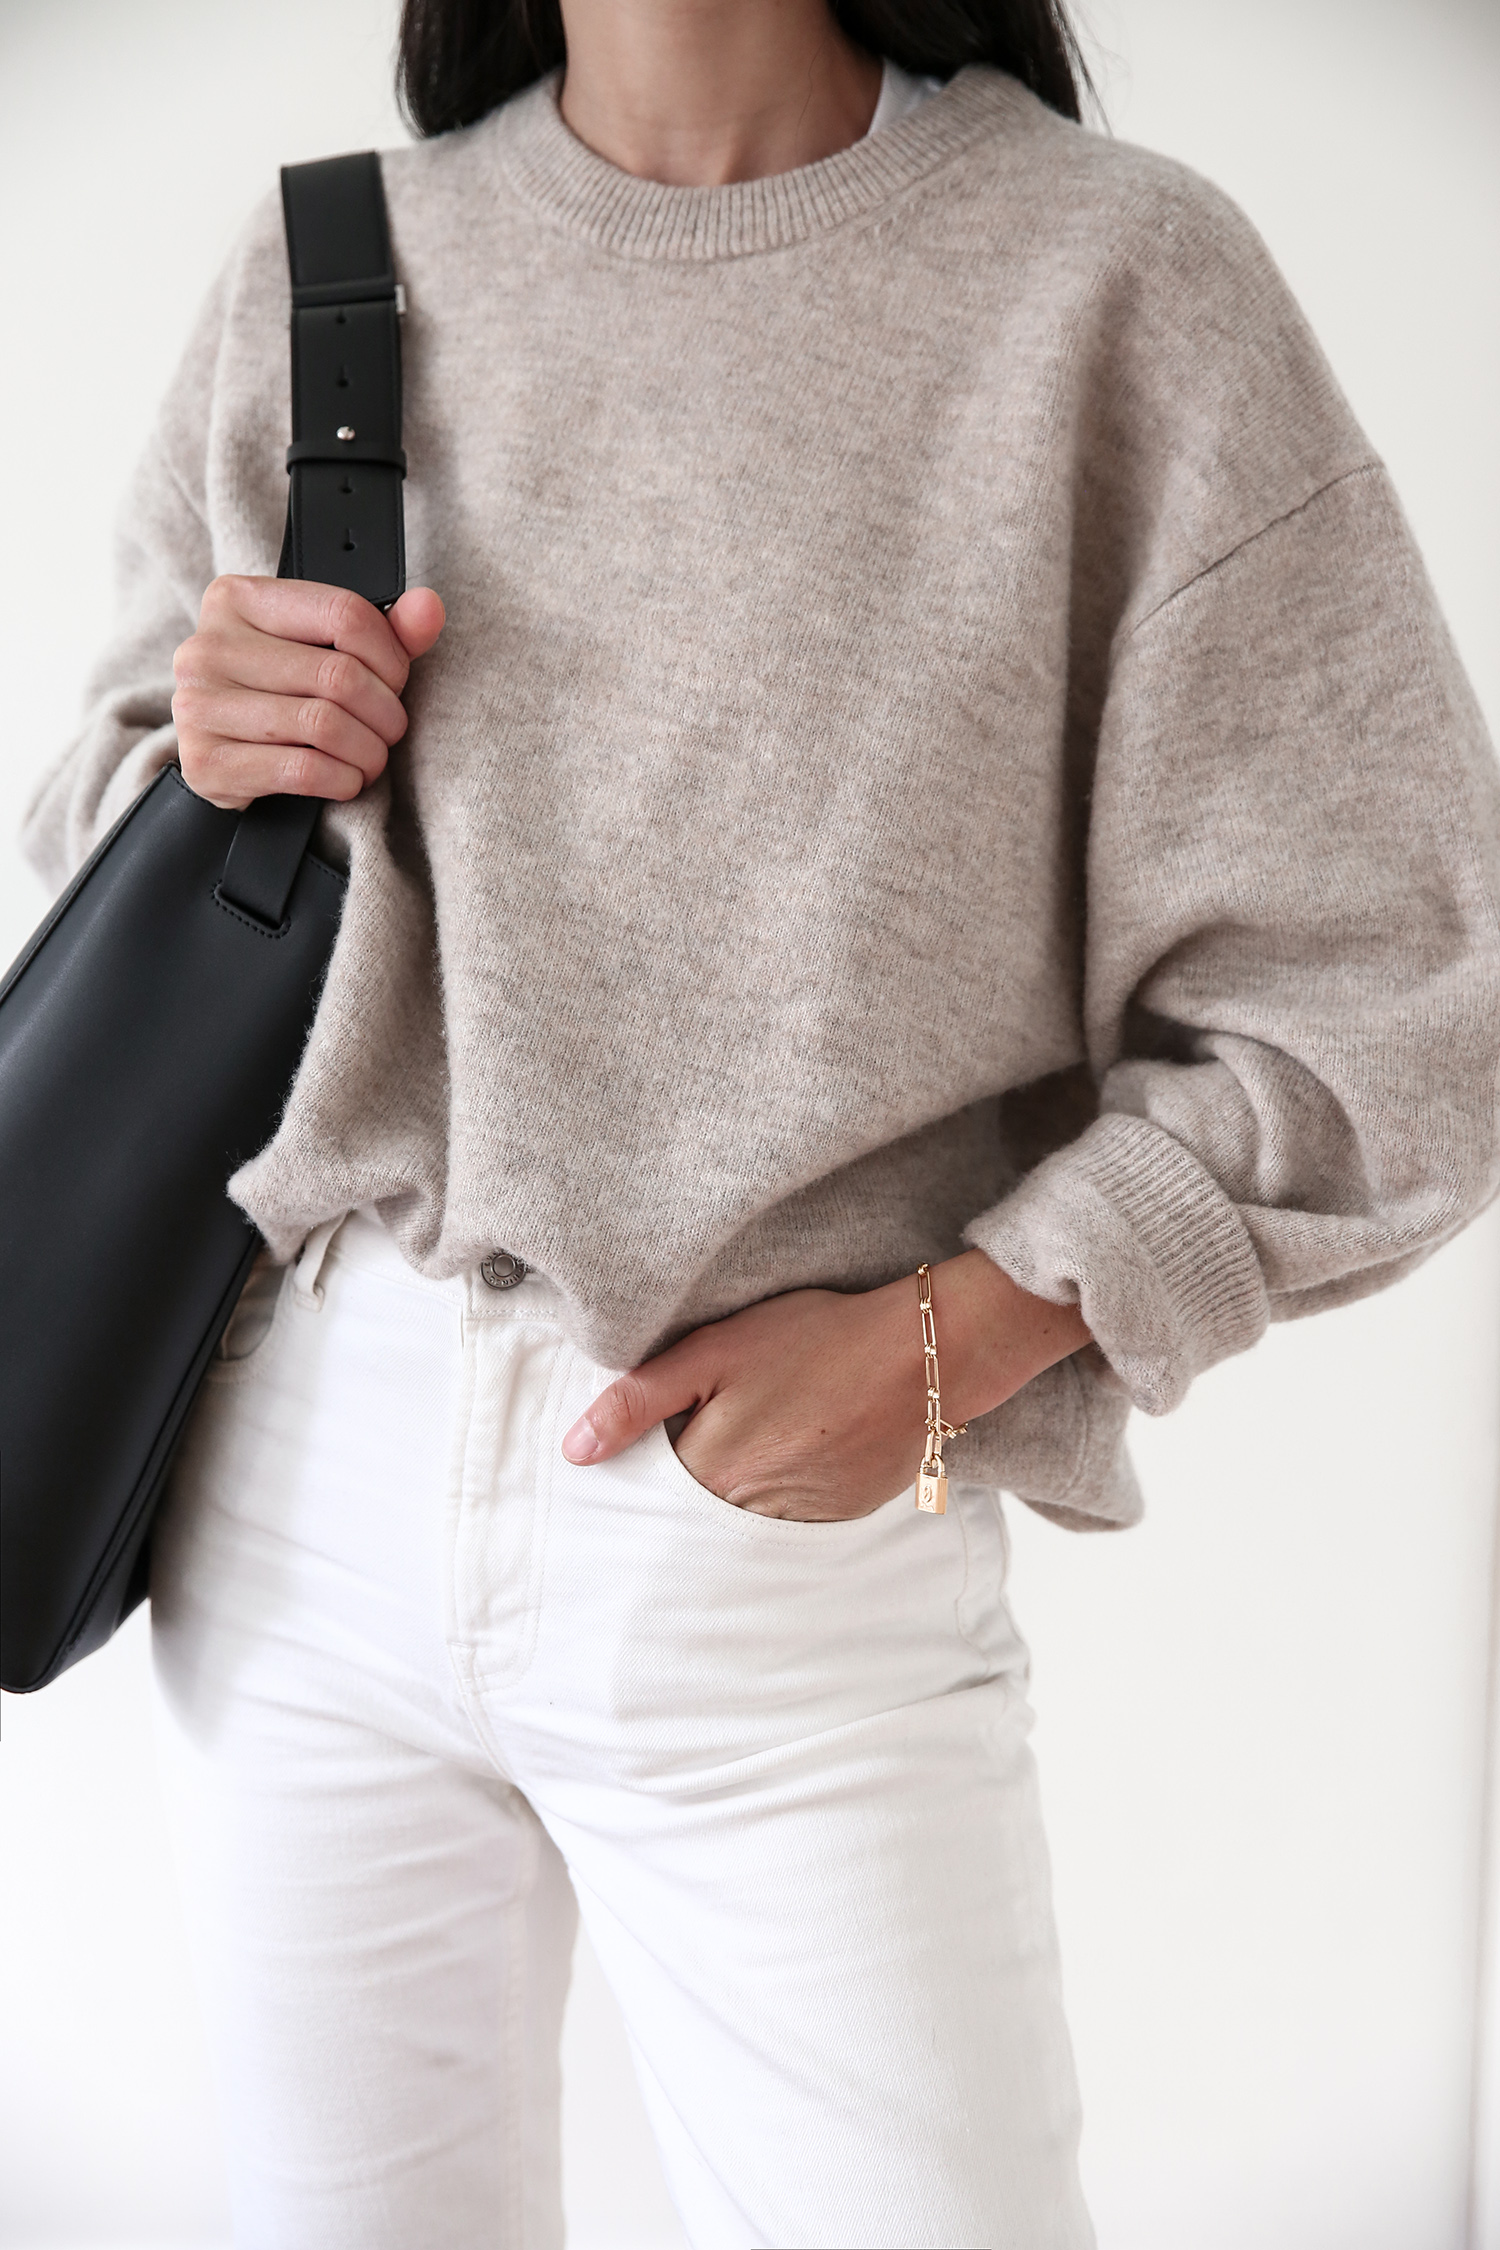 & Other Stories oversized sweater Everlane cheeky straight jeans